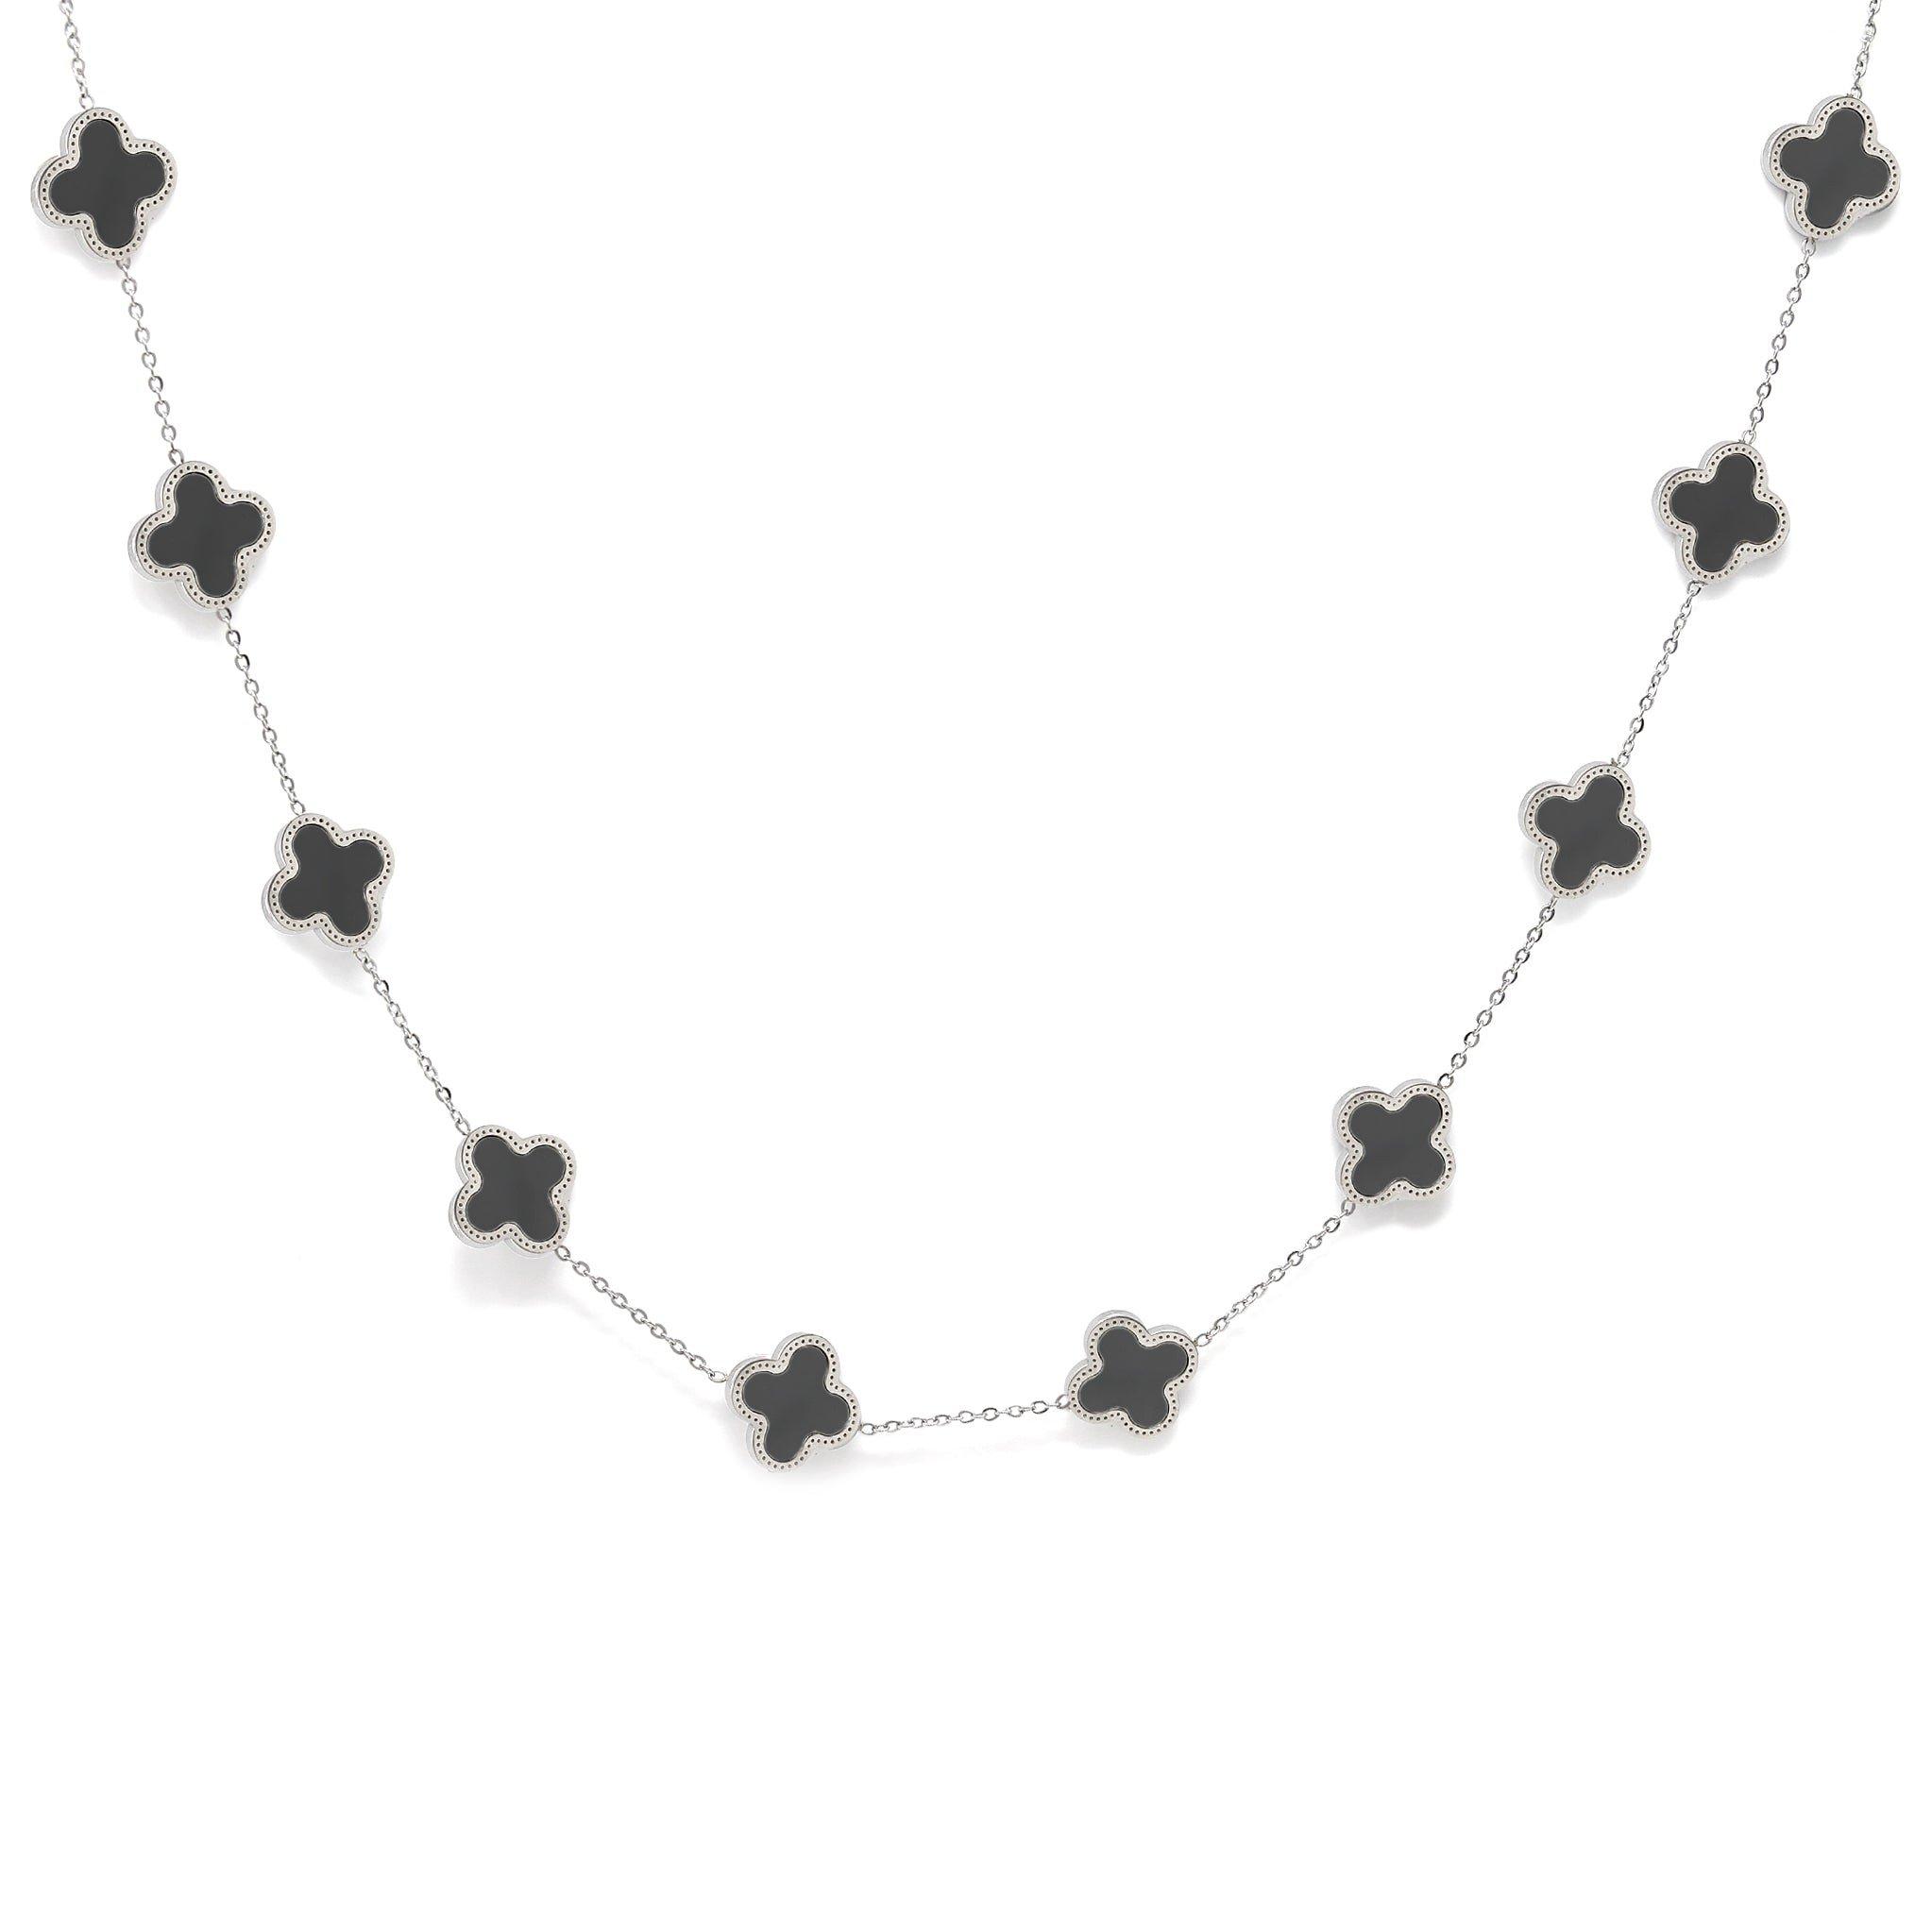 Luck Chocker Necklace Black And Silver